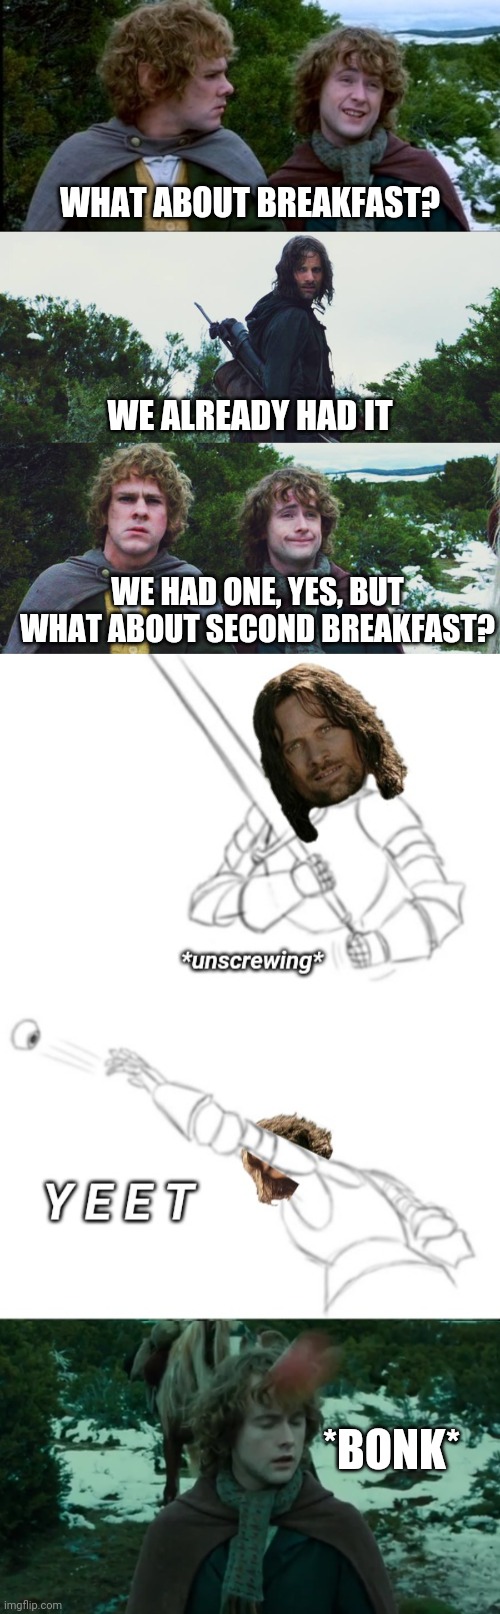 There, that should shut him up. At least, for a while. | WHAT ABOUT BREAKFAST? WE ALREADY HAD IT; WE HAD ONE, YES, BUT WHAT ABOUT SECOND BREAKFAST? *BONK* | image tagged in pippin second breakfast,aragorn merry pippin second breakfast,pommels,swords,end him rightly | made w/ Imgflip meme maker